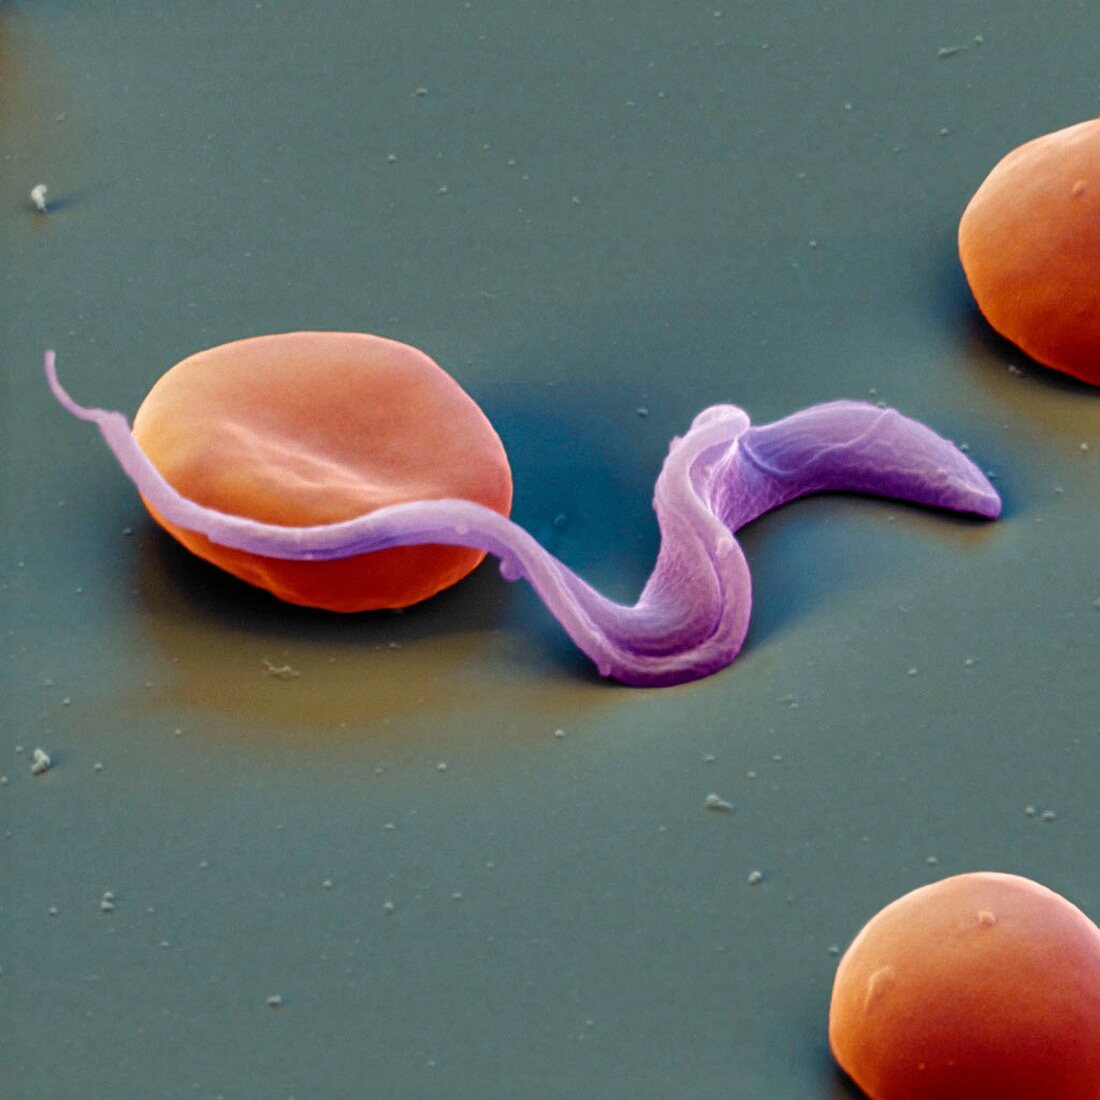 Colour SEM of Trypansoma sp. protozoa in blood